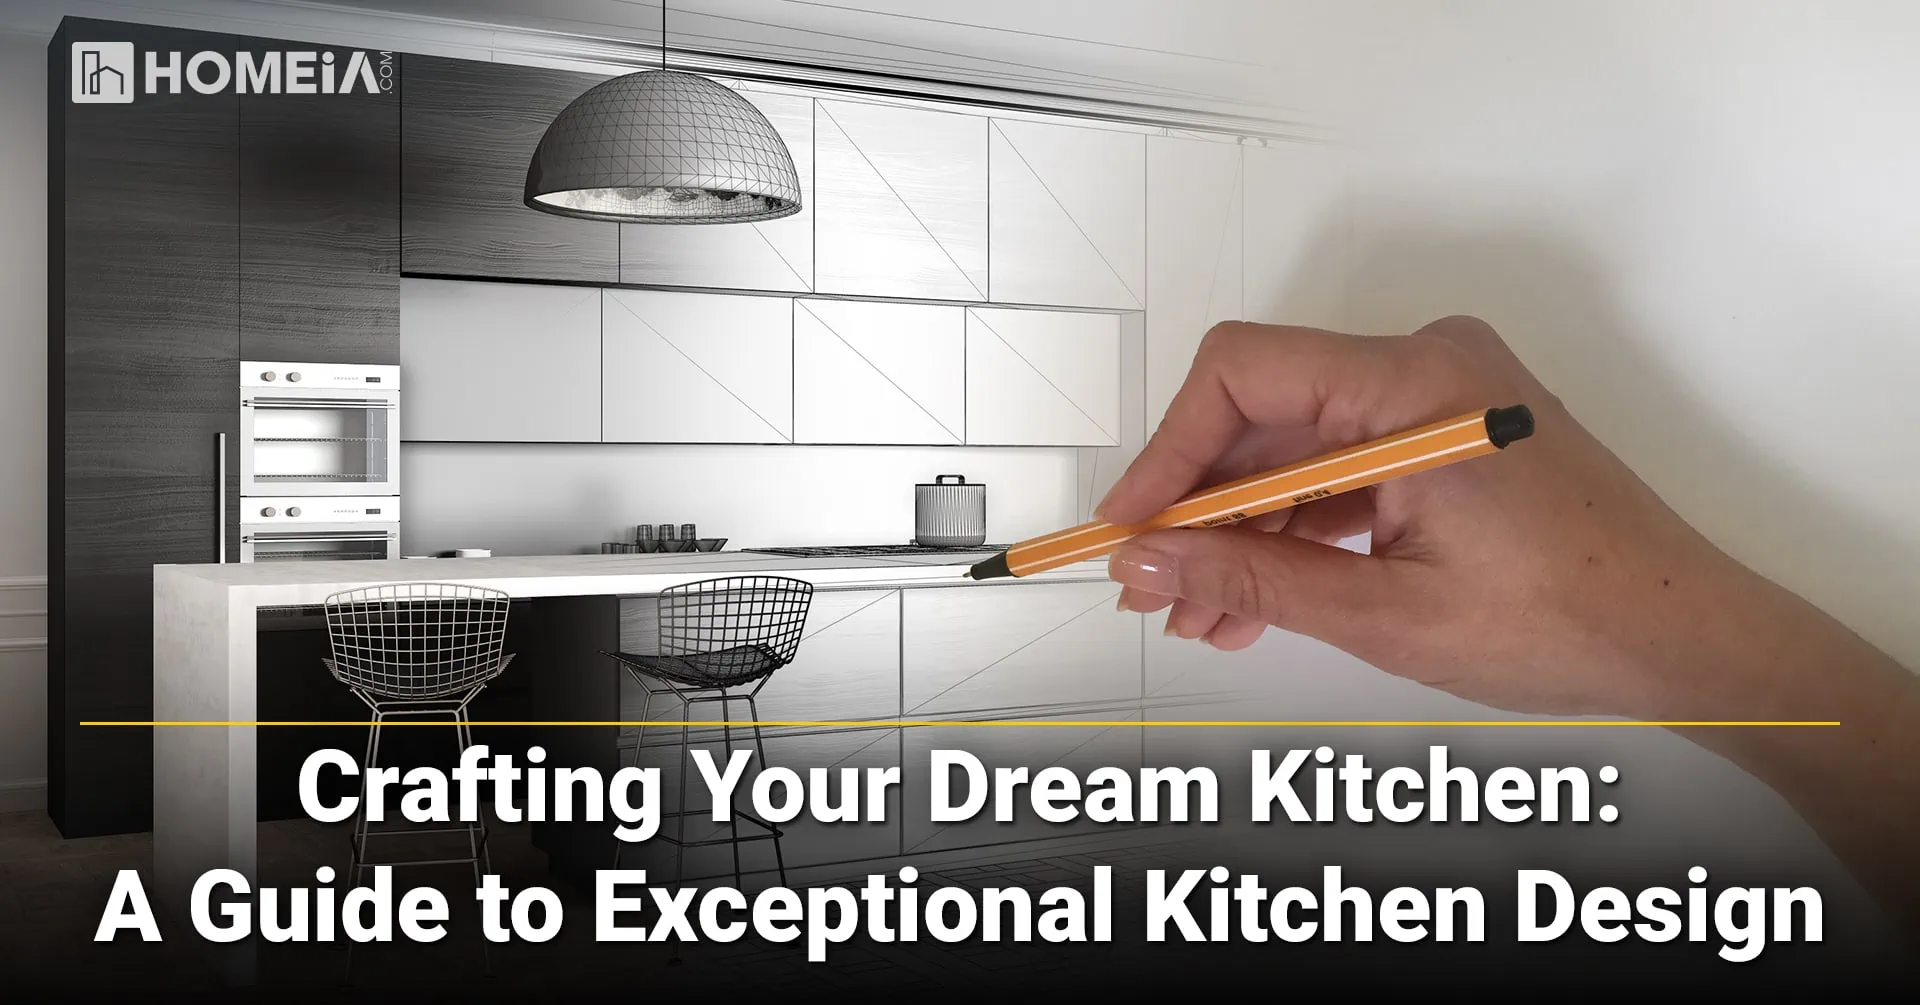 Crafting Your Dream Kitchen: A Guide to Exceptional Kitchen Design